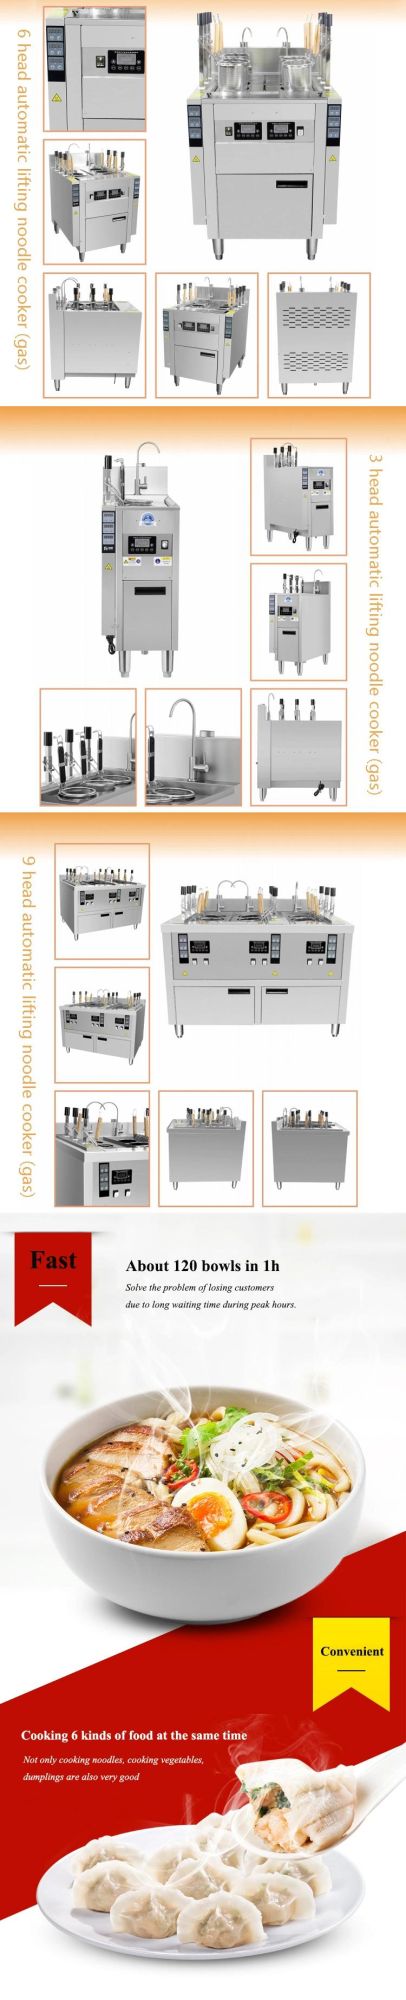 Automatic Lift Commercial Pasta Noodle Cooking Machine Gas Italy Pasta Cooker Boiler with 3/6/9 Baskets